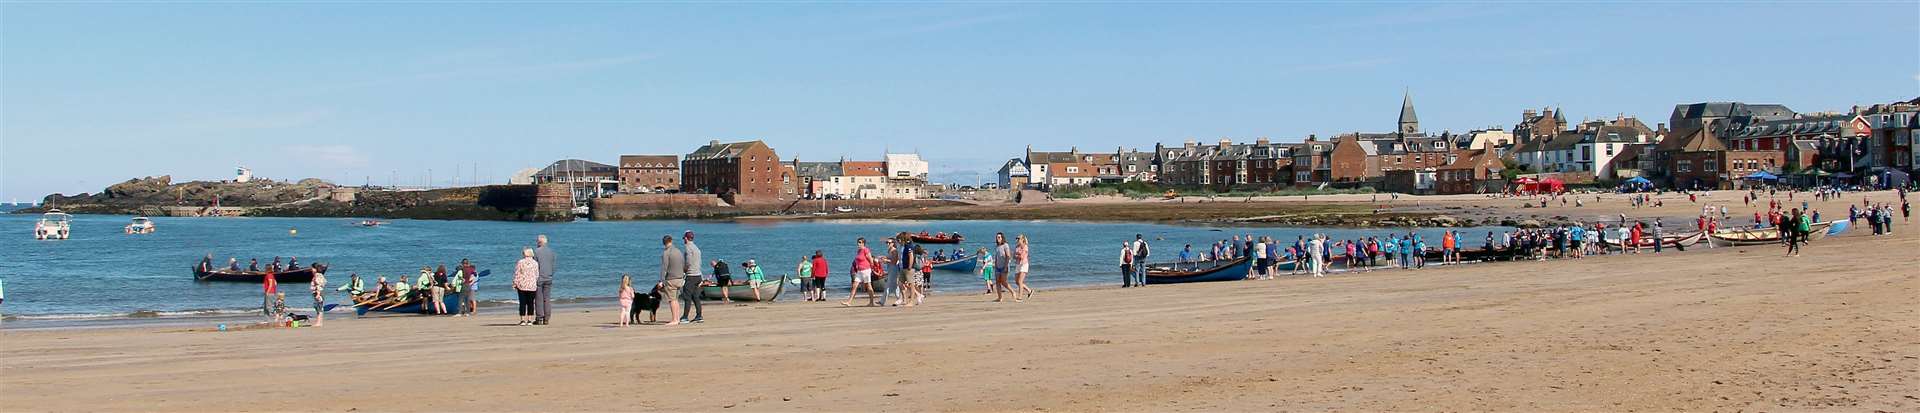 The rowing regatta at North Berwick is well-established. Picture: David Richardson